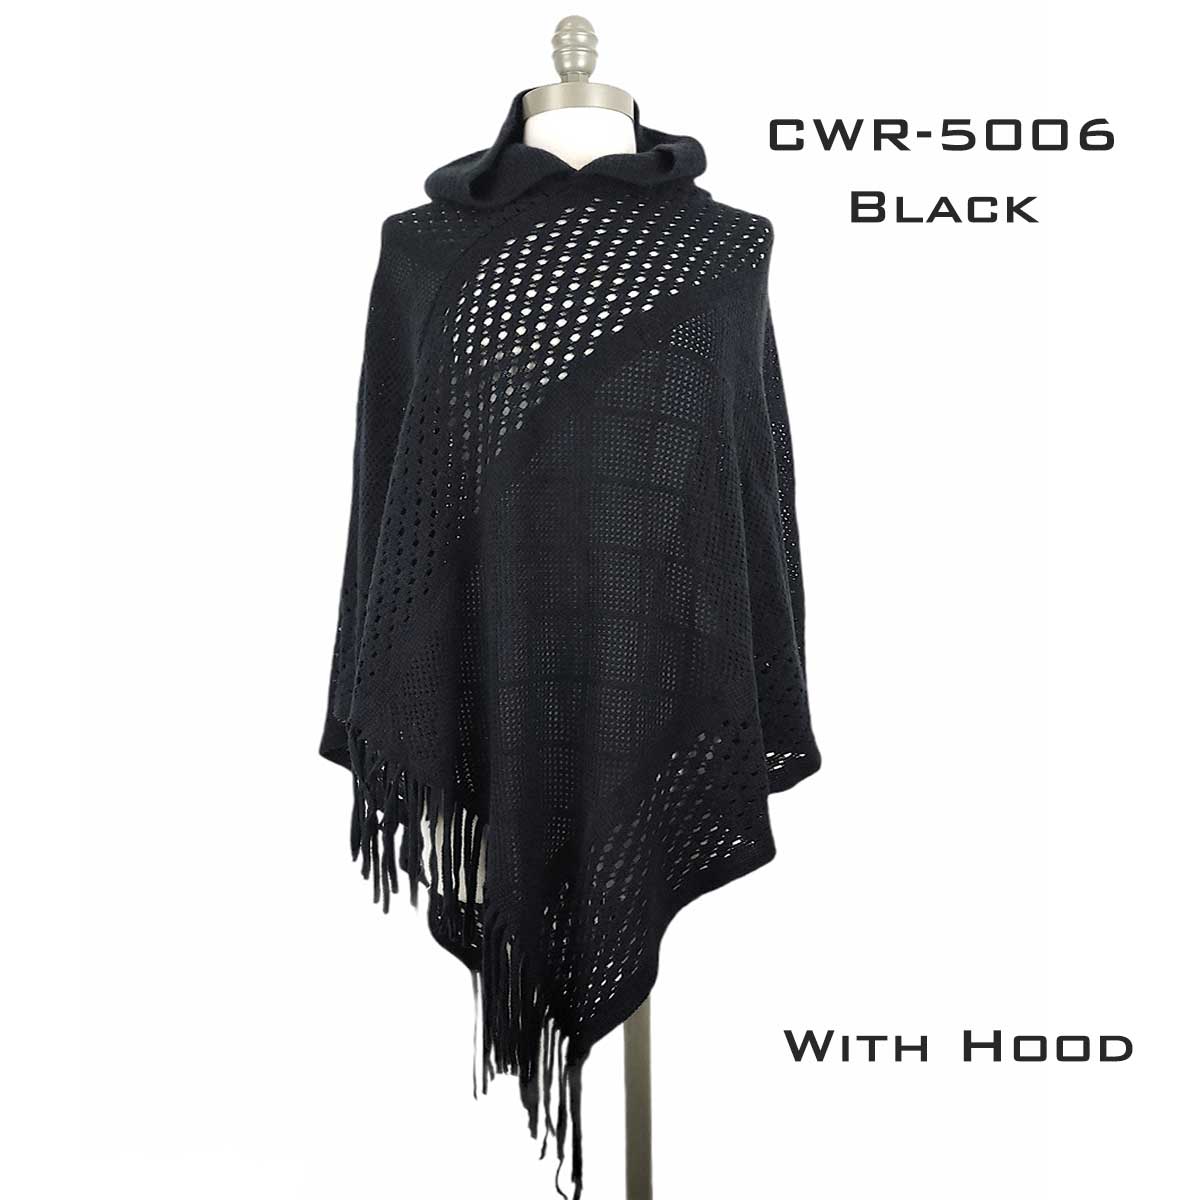 CWR5006 BLACK Hooded Poncho with Fringe